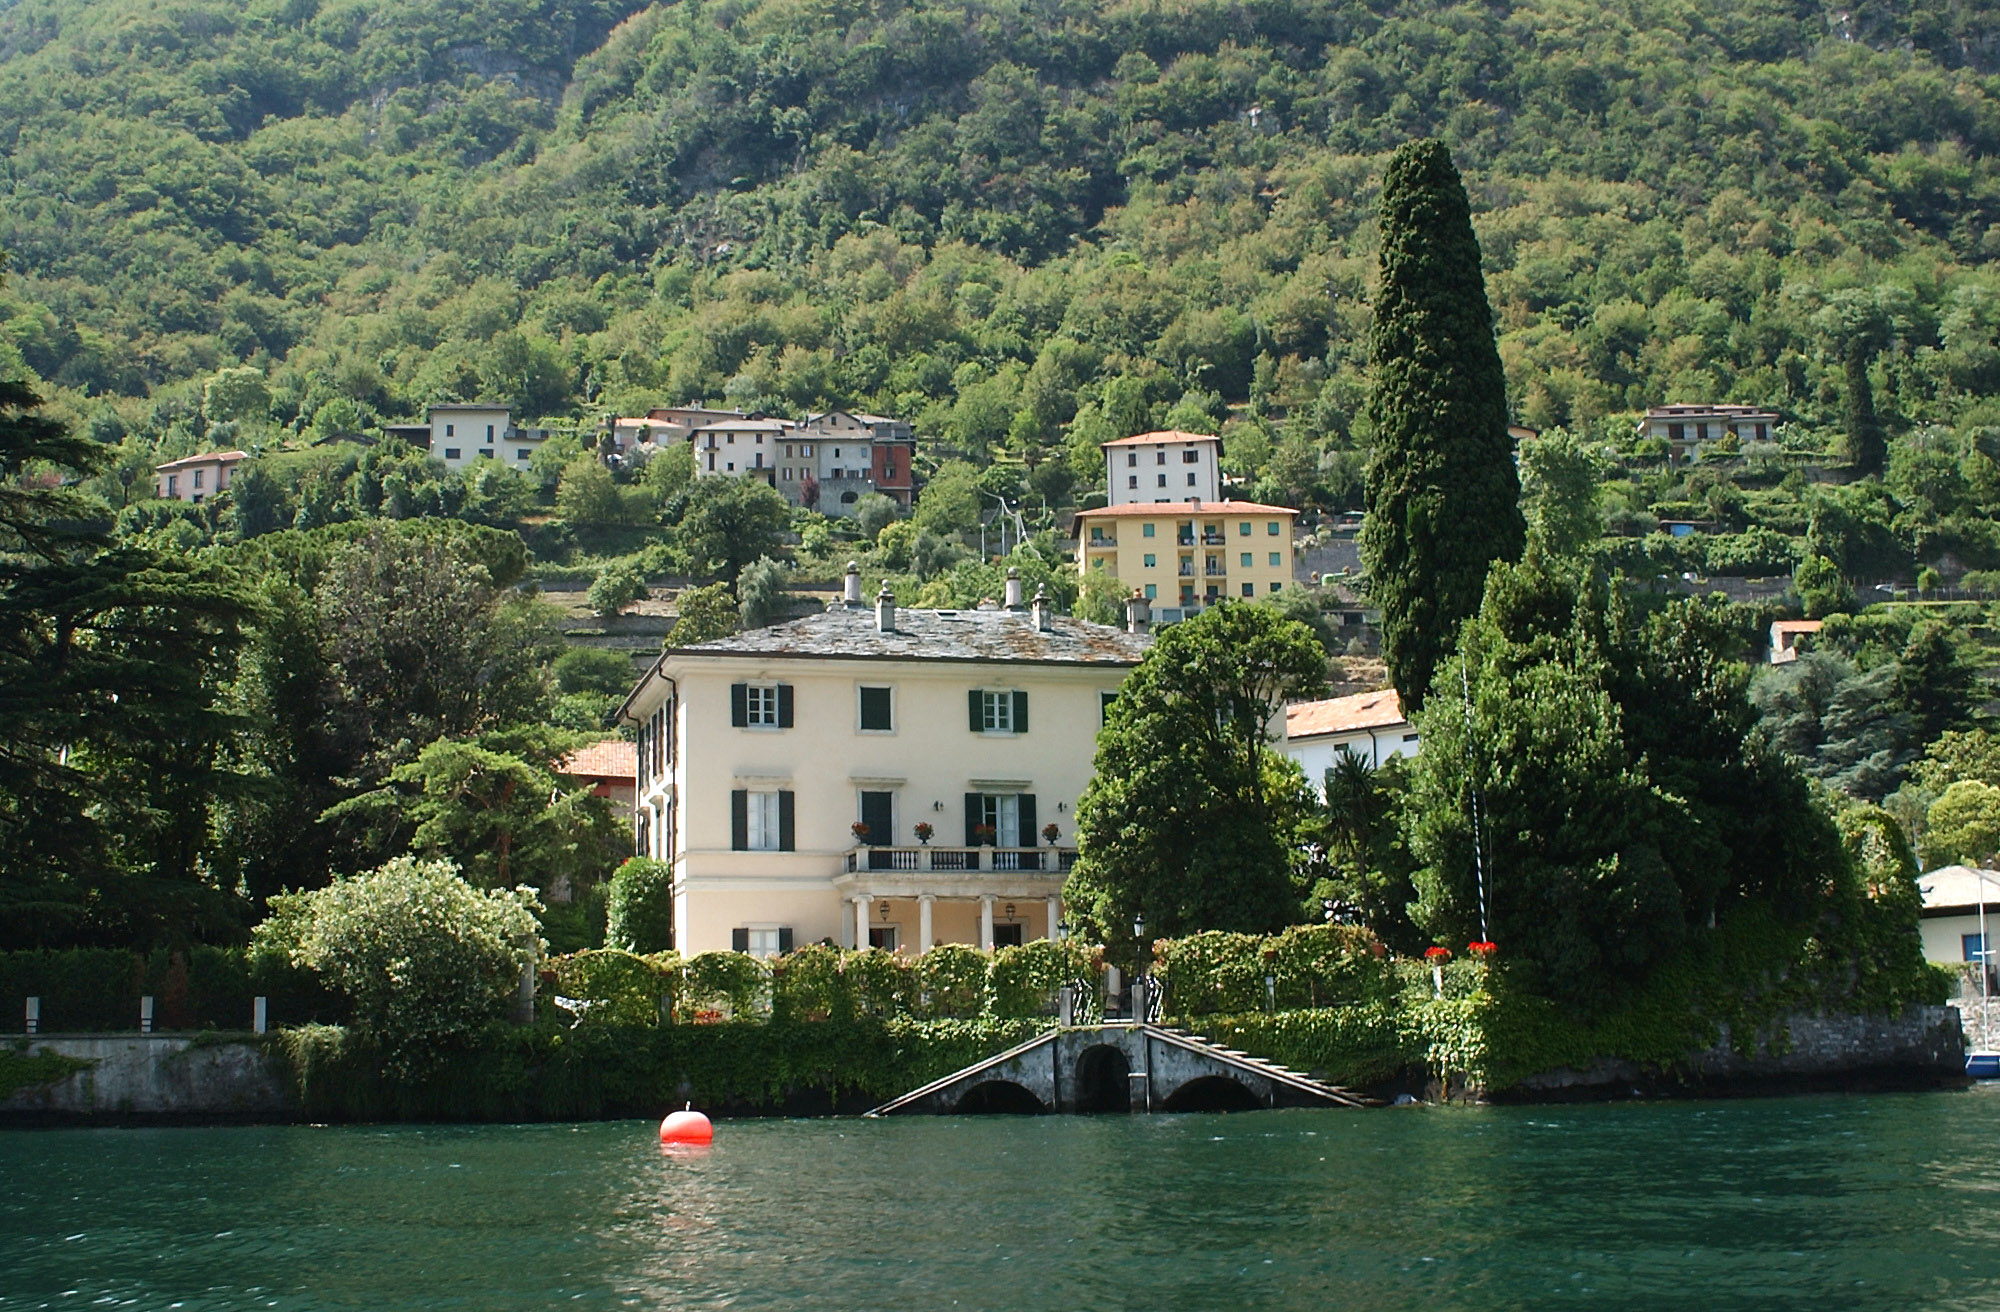 A lakeside view of George Clooney's villa Oleandra on Lake Como, northern Italy, taken Thursday, July 8, 2004. (Antonio Calanni—Associated Press)